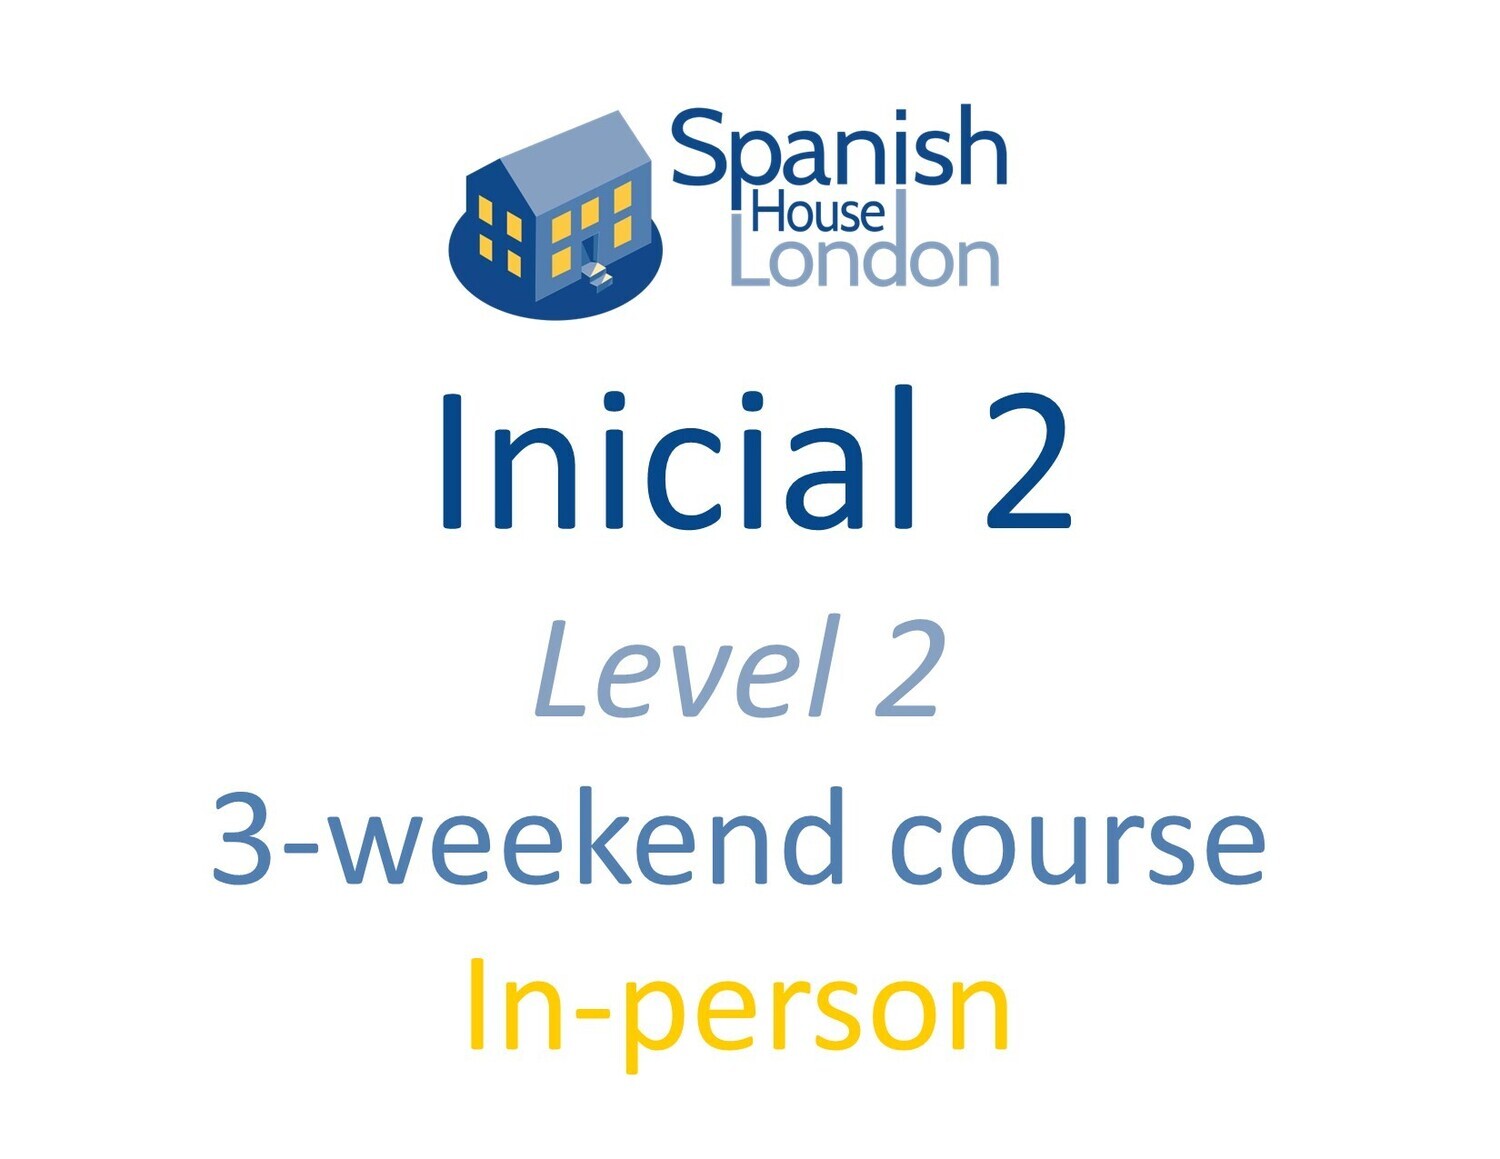 Weekend-Intensive Inicial 2 Course starting on 21st October at 7pm in Clapham North